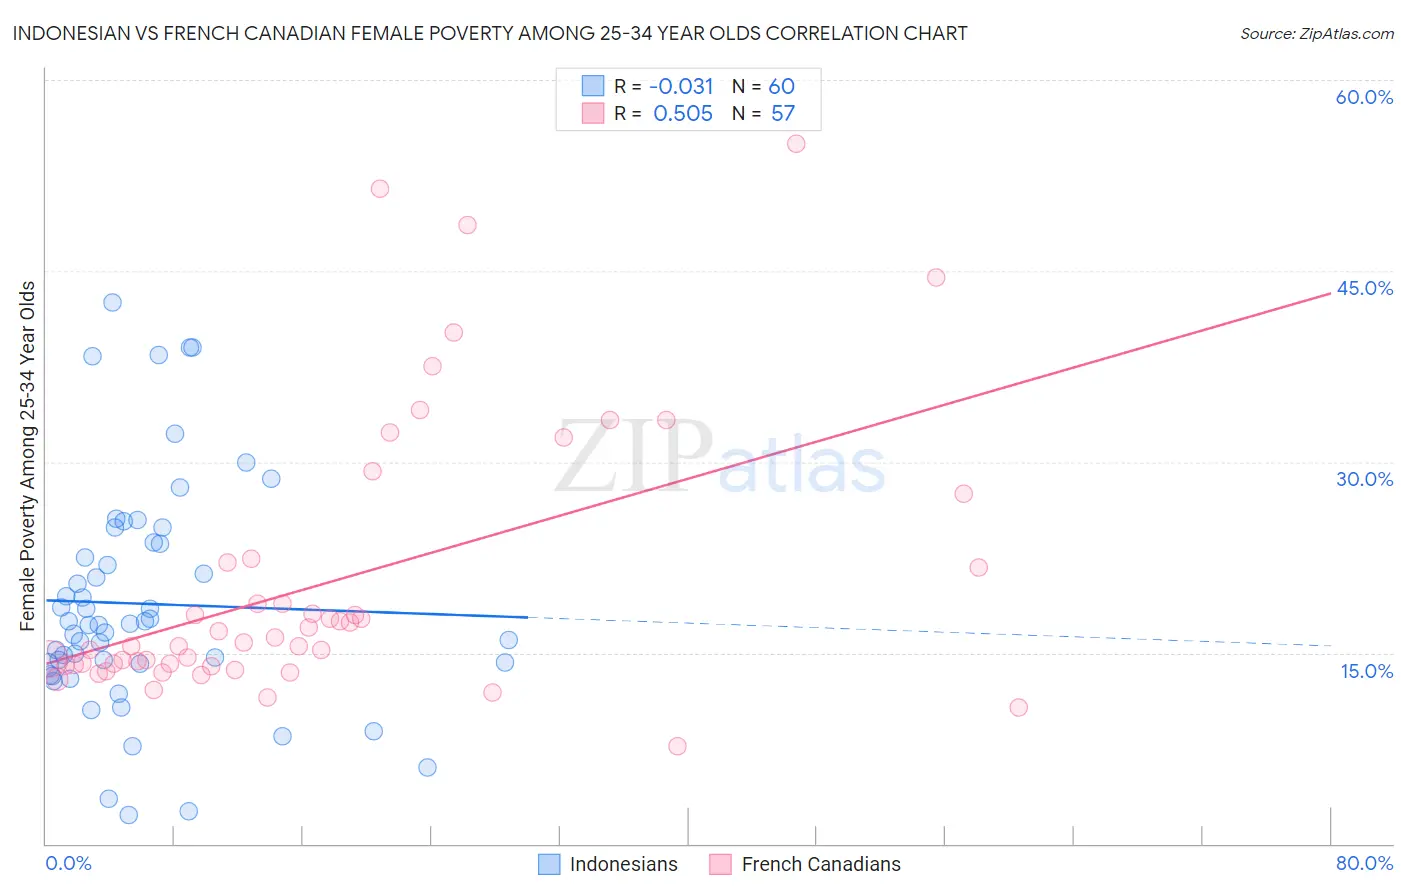 Indonesian vs French Canadian Female Poverty Among 25-34 Year Olds